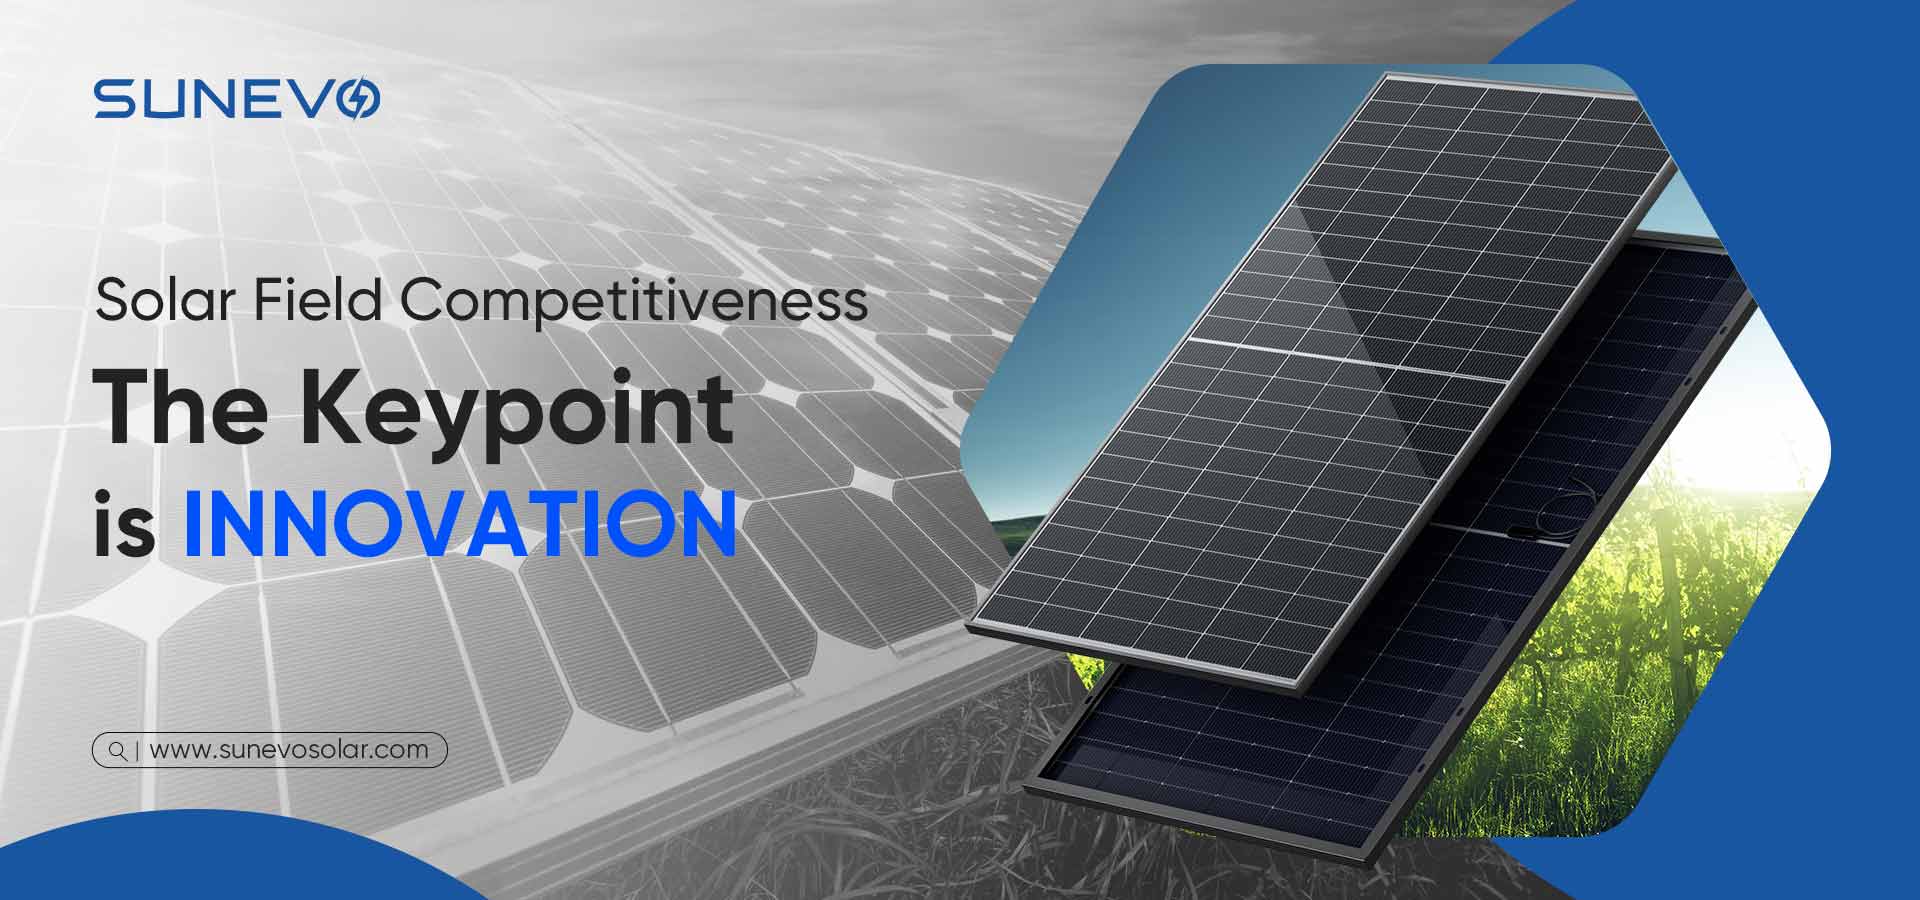 Innovation As The Key To Solar Industry Competitiveness